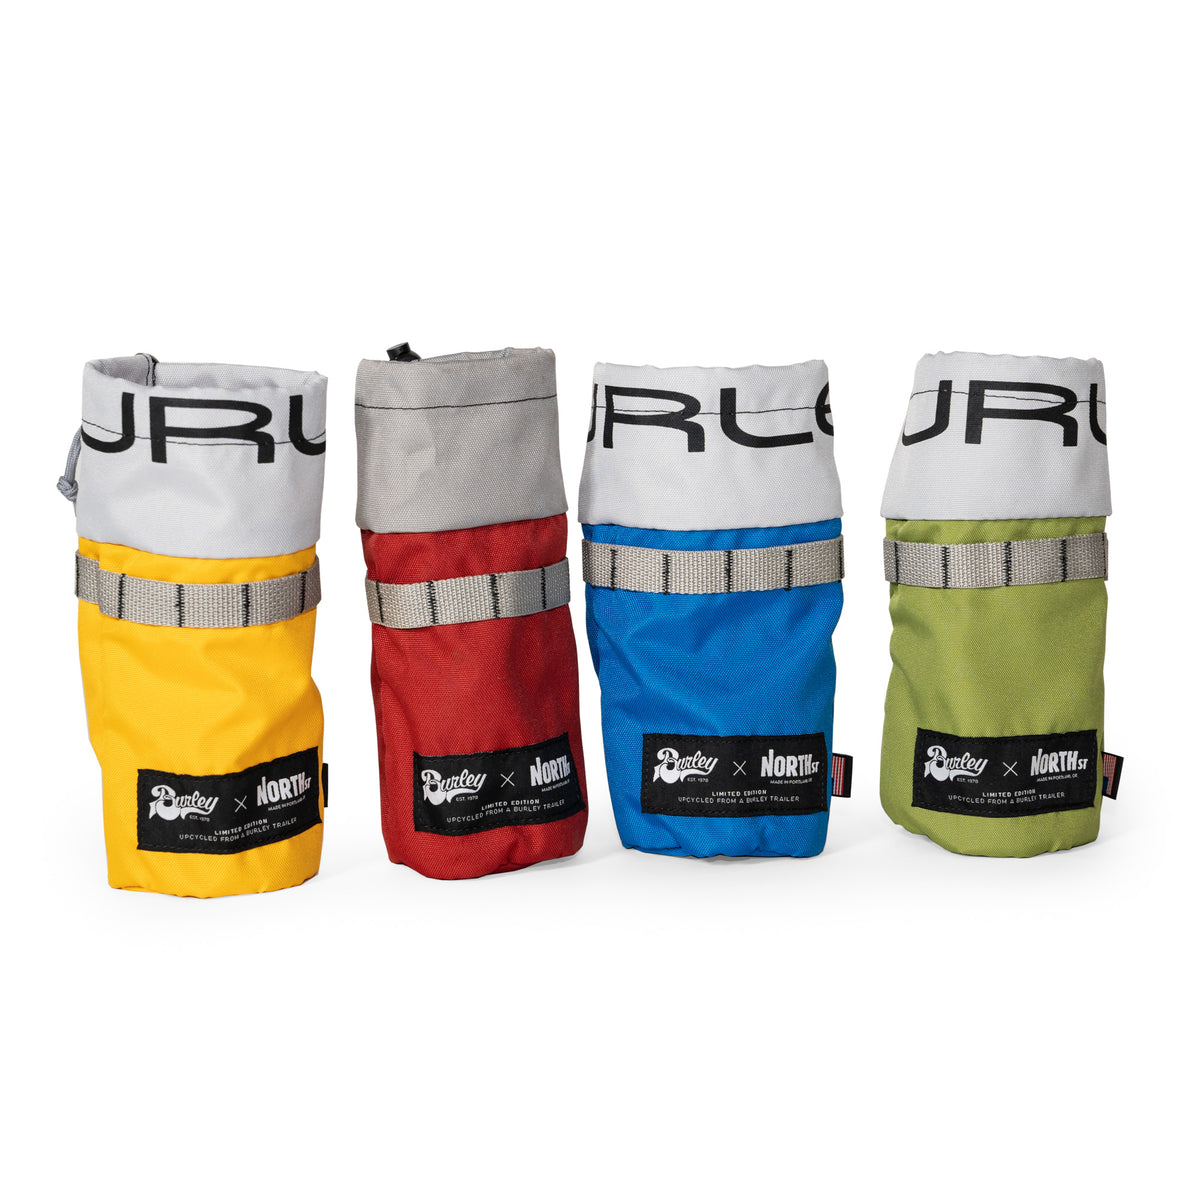 Burley Bottle Sleeves In Different Colors